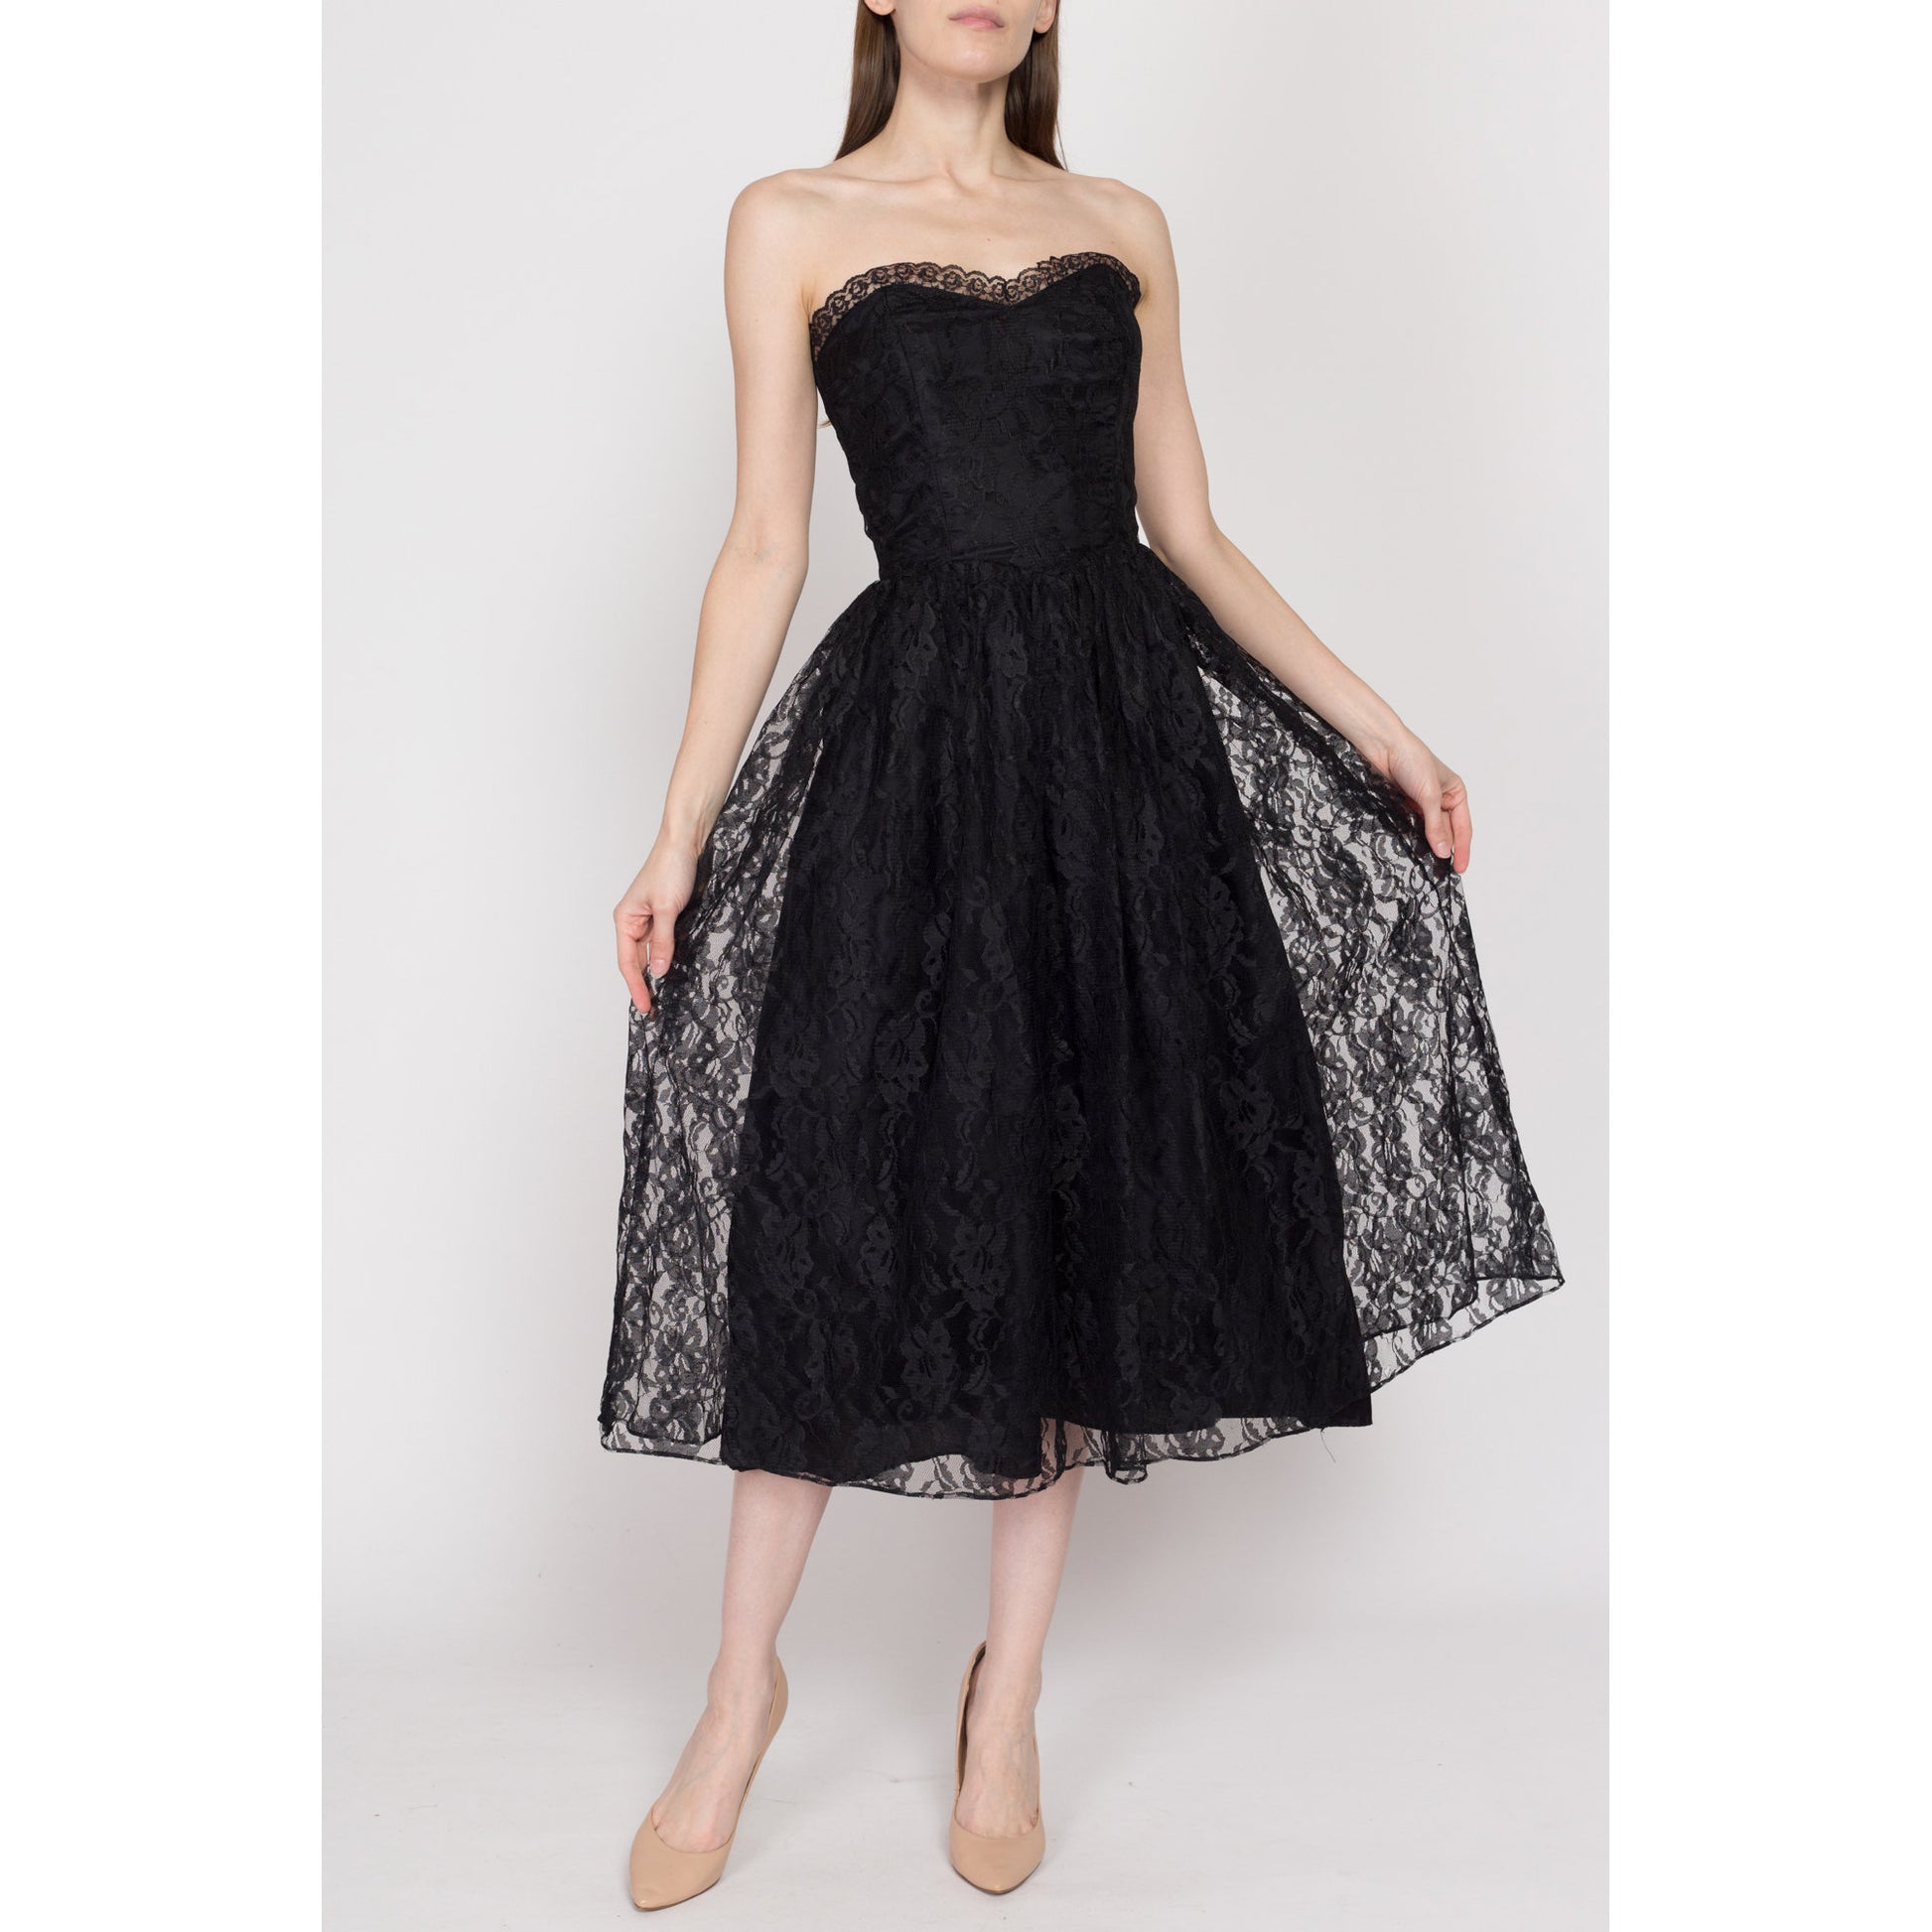 XS-Sm 80s Black Lace Strapless Party Dress | Vintage Fit & Flare Gothic Formal Midi Dress